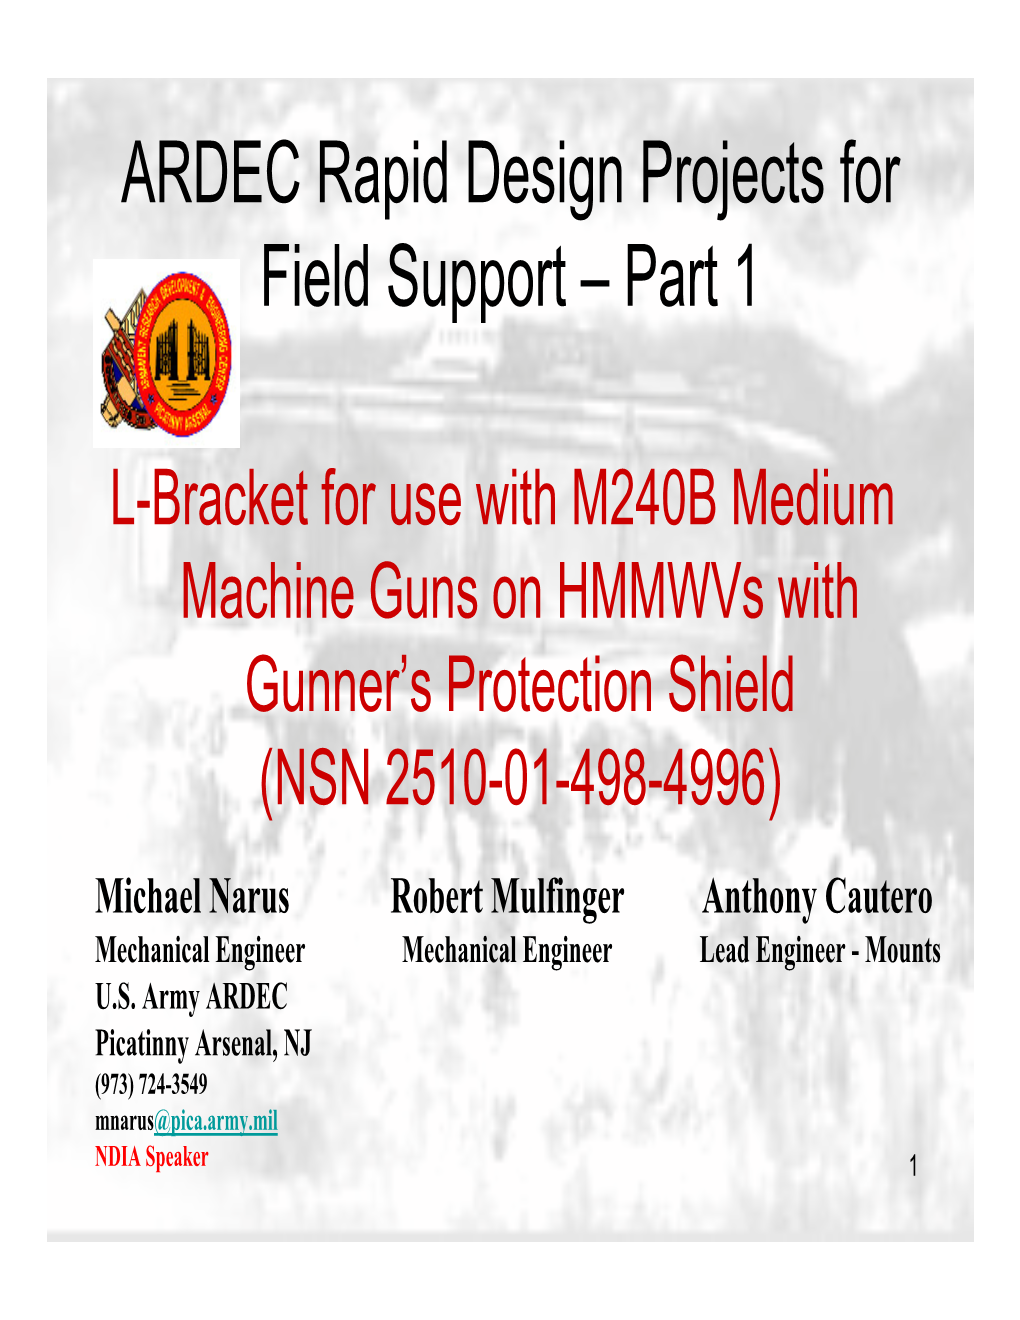 ARDEC Rapid Design Projects for Field Support – Part 1